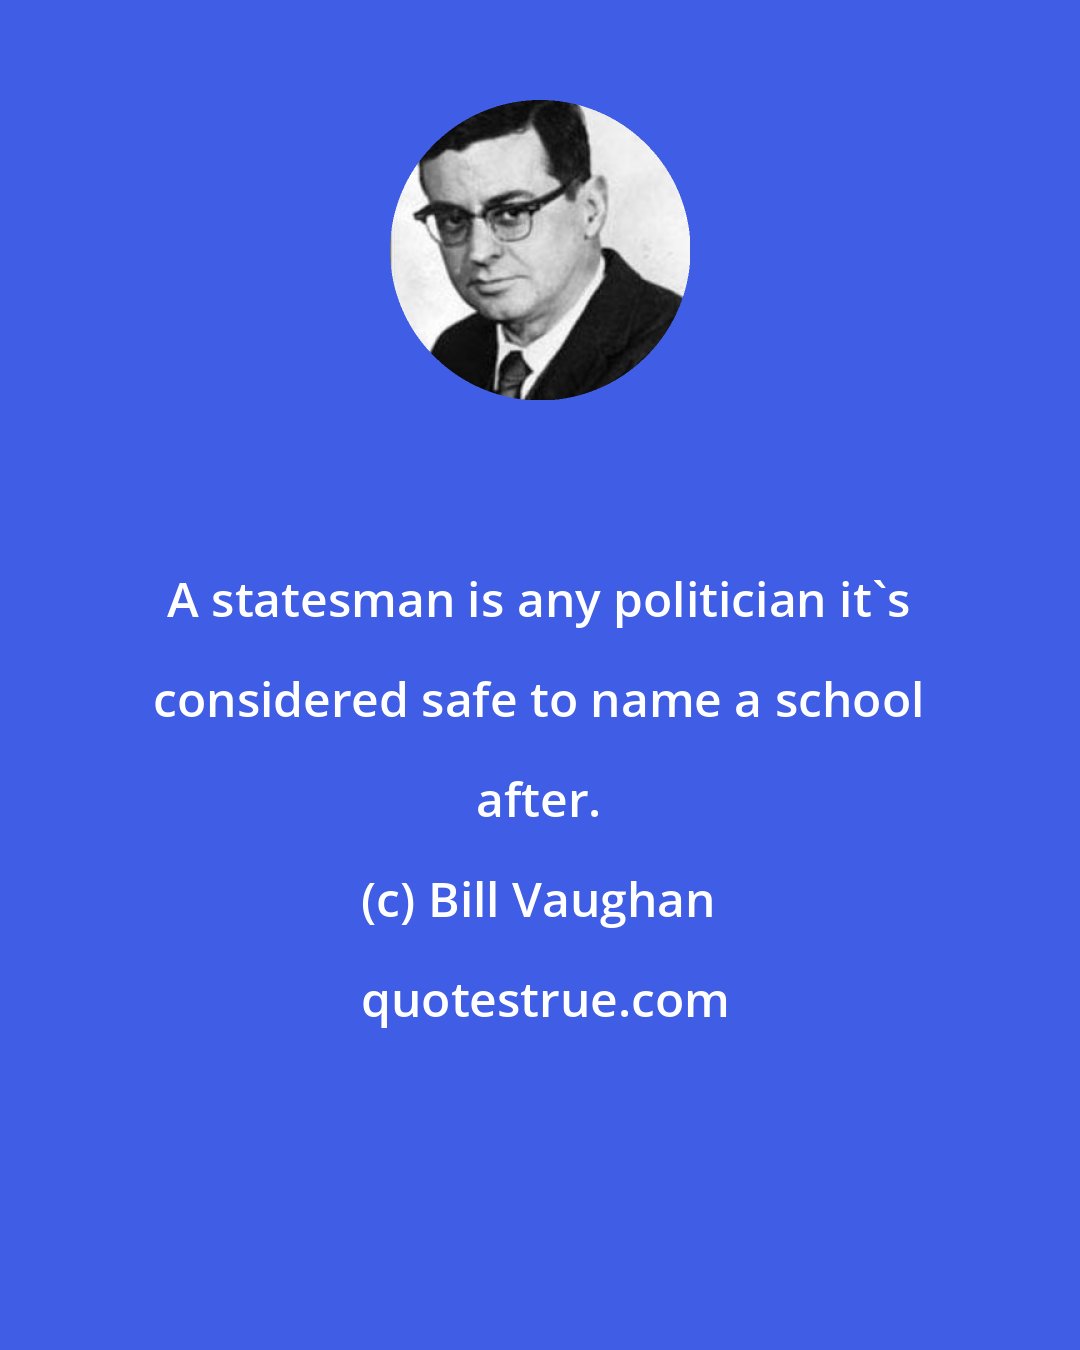 Bill Vaughan: A statesman is any politician it's considered safe to name a school after.